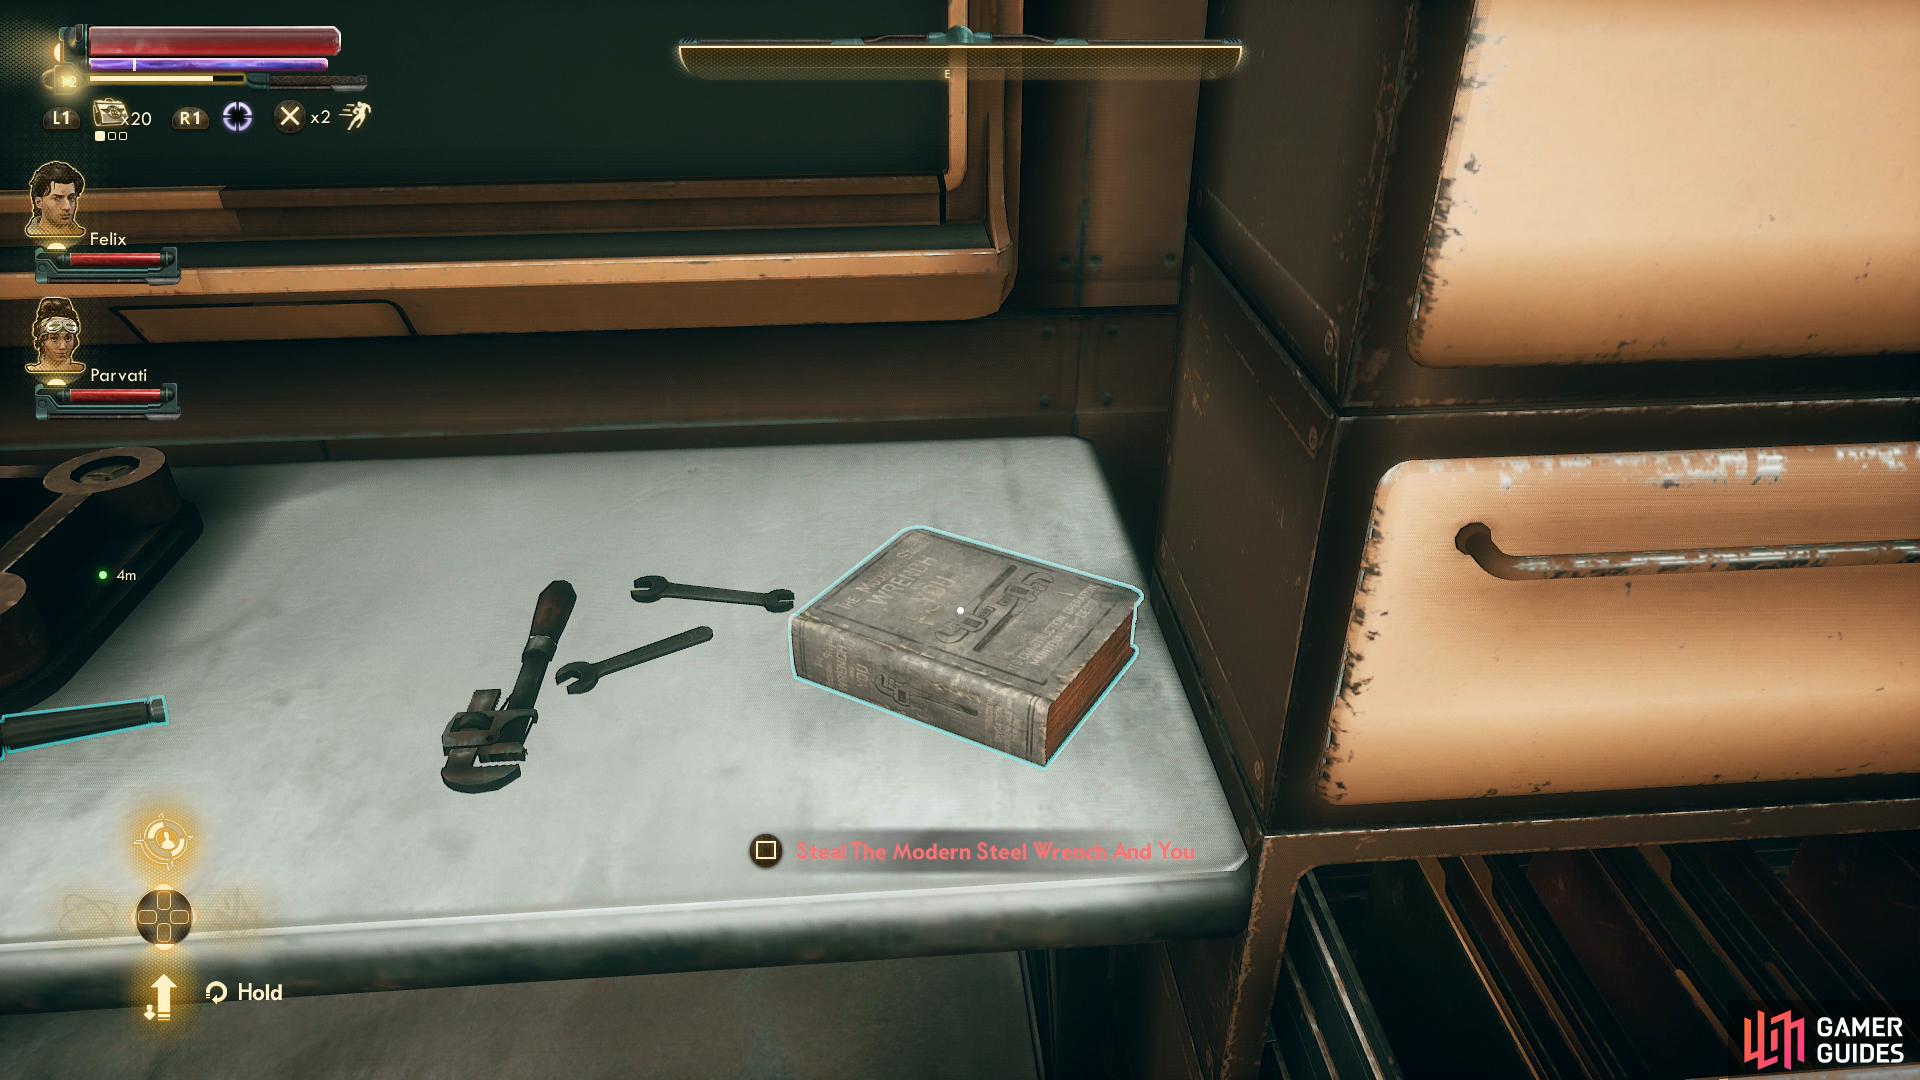 You can also score a copy of "The Modern Steel Wrench and You" from a table nearby, which can be used to decorate the Unreliable.